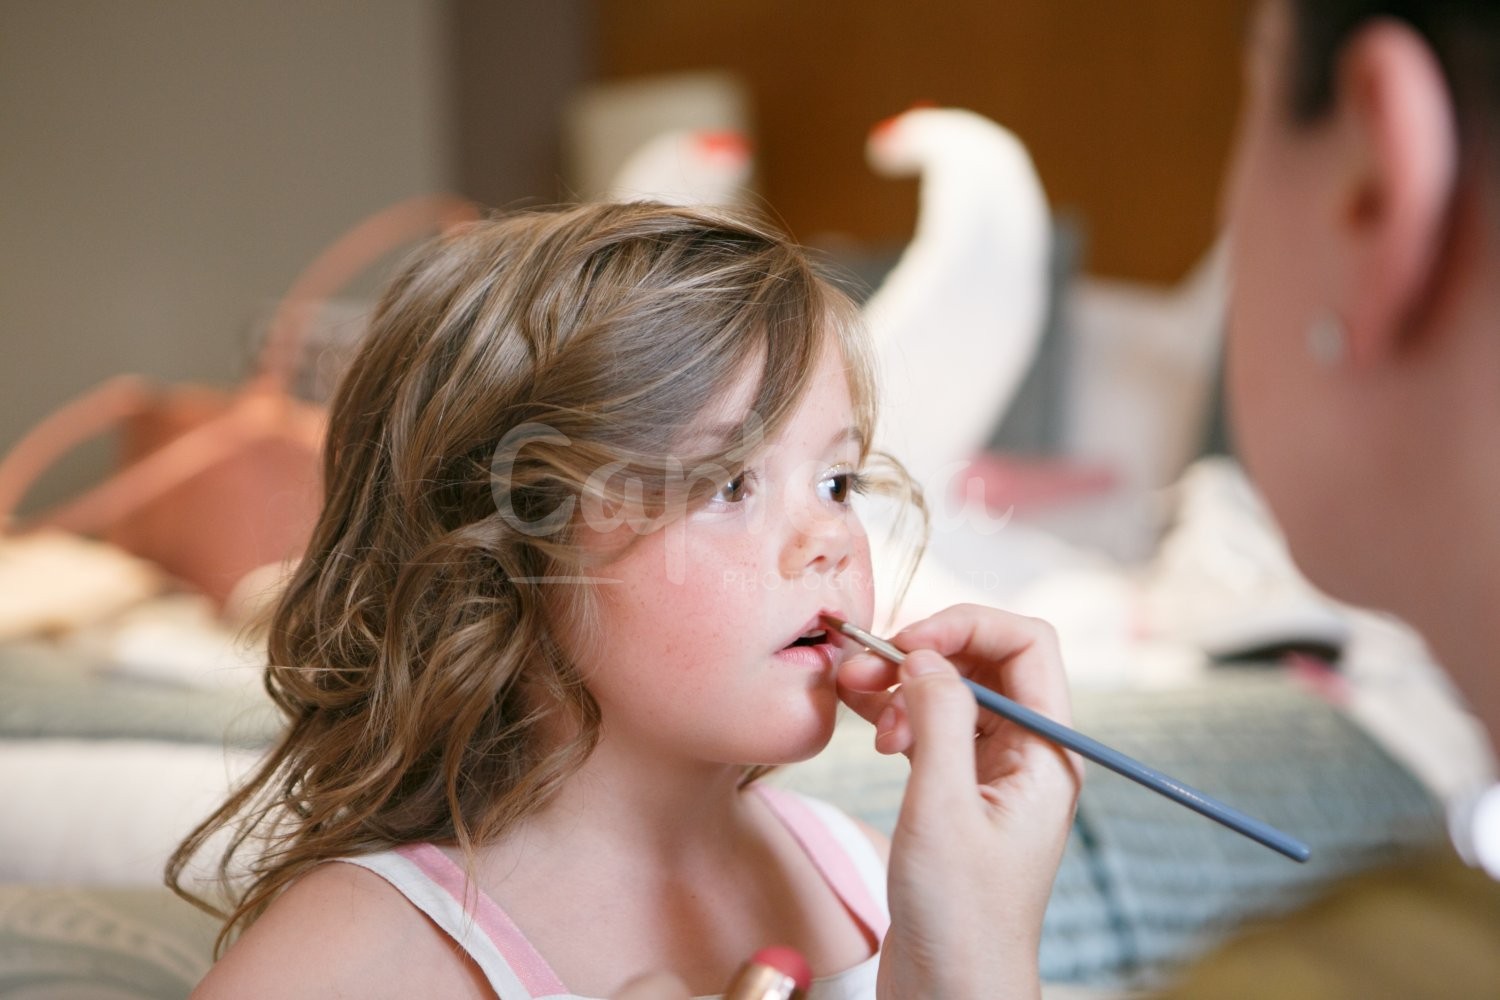 Its just as exciting as Christmas flowergirl, getting ready, makeup artist, captcha photography, yew lodge hotel, pretty